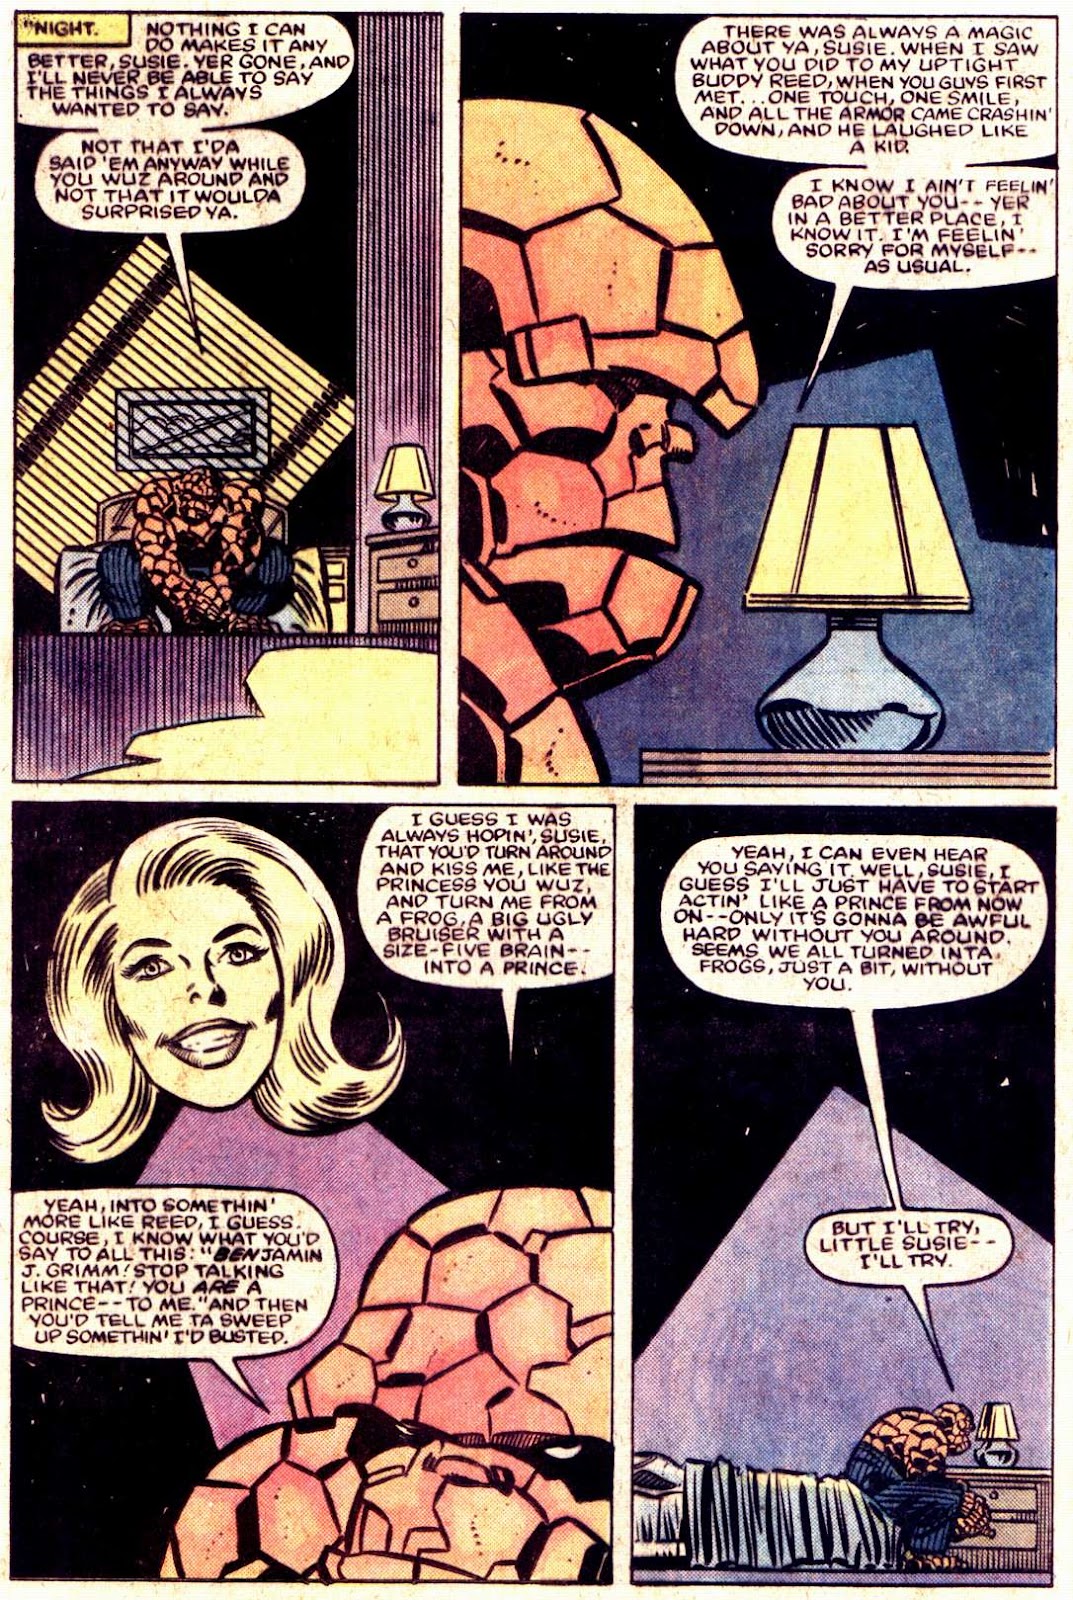 What If? (1977) issue 42 - The Invisible Girl had died - Page 20